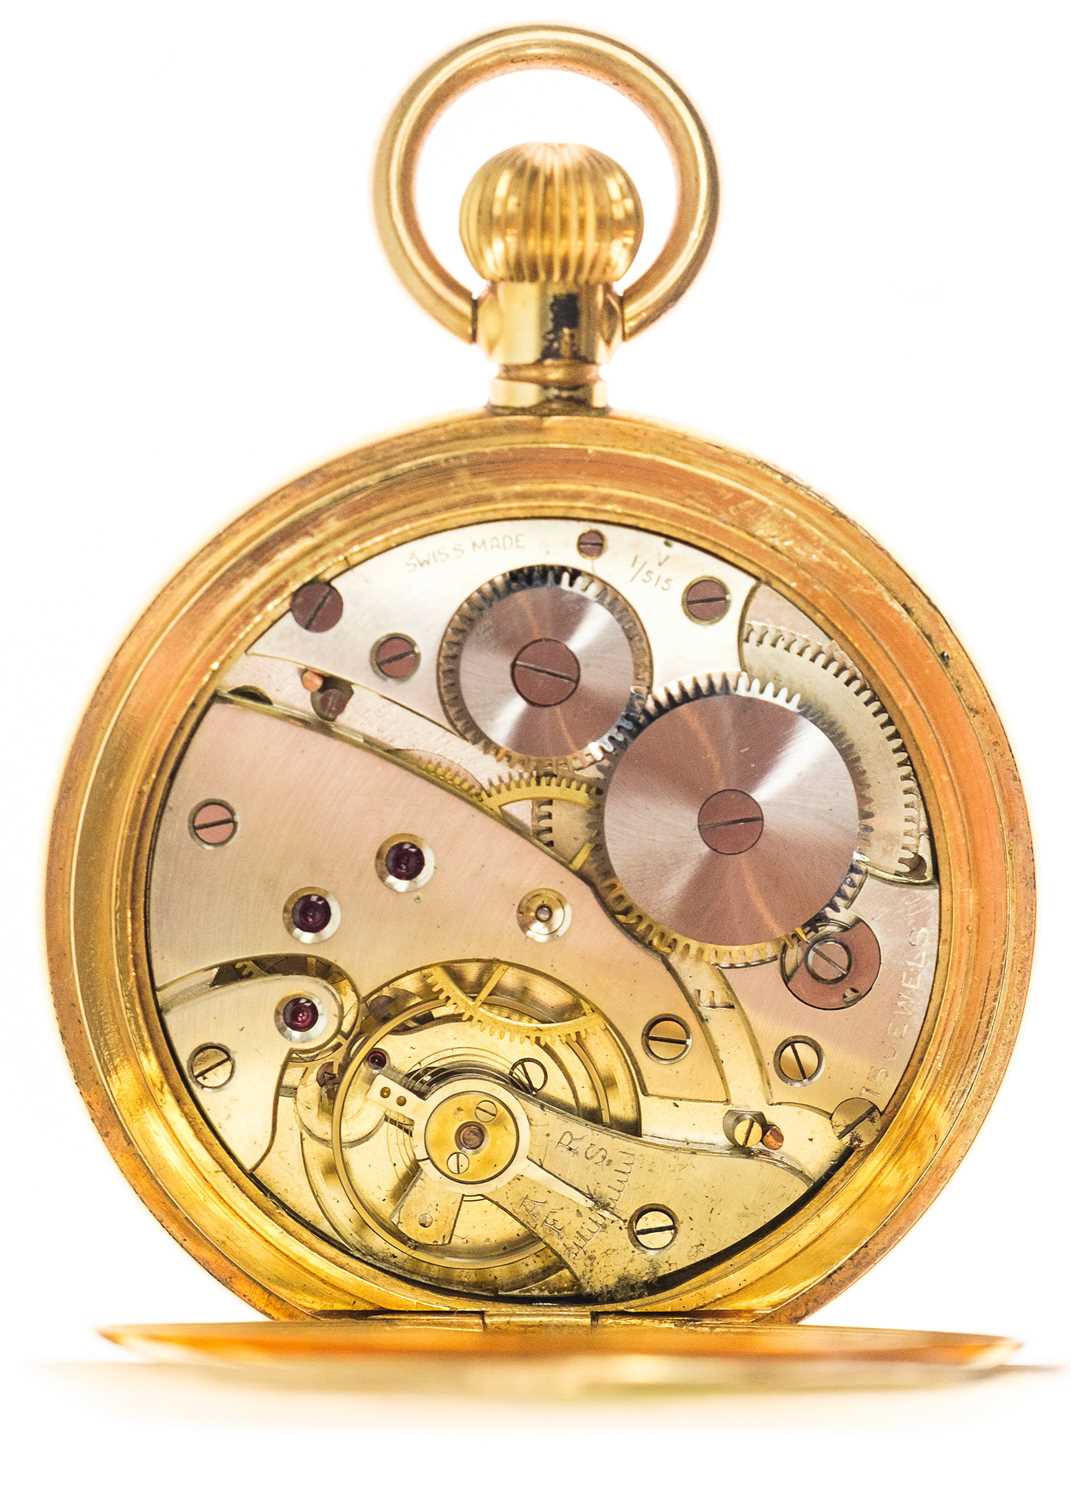 A gold-plated full hunter crown wind pocket watch by Rotary. - Image 2 of 5